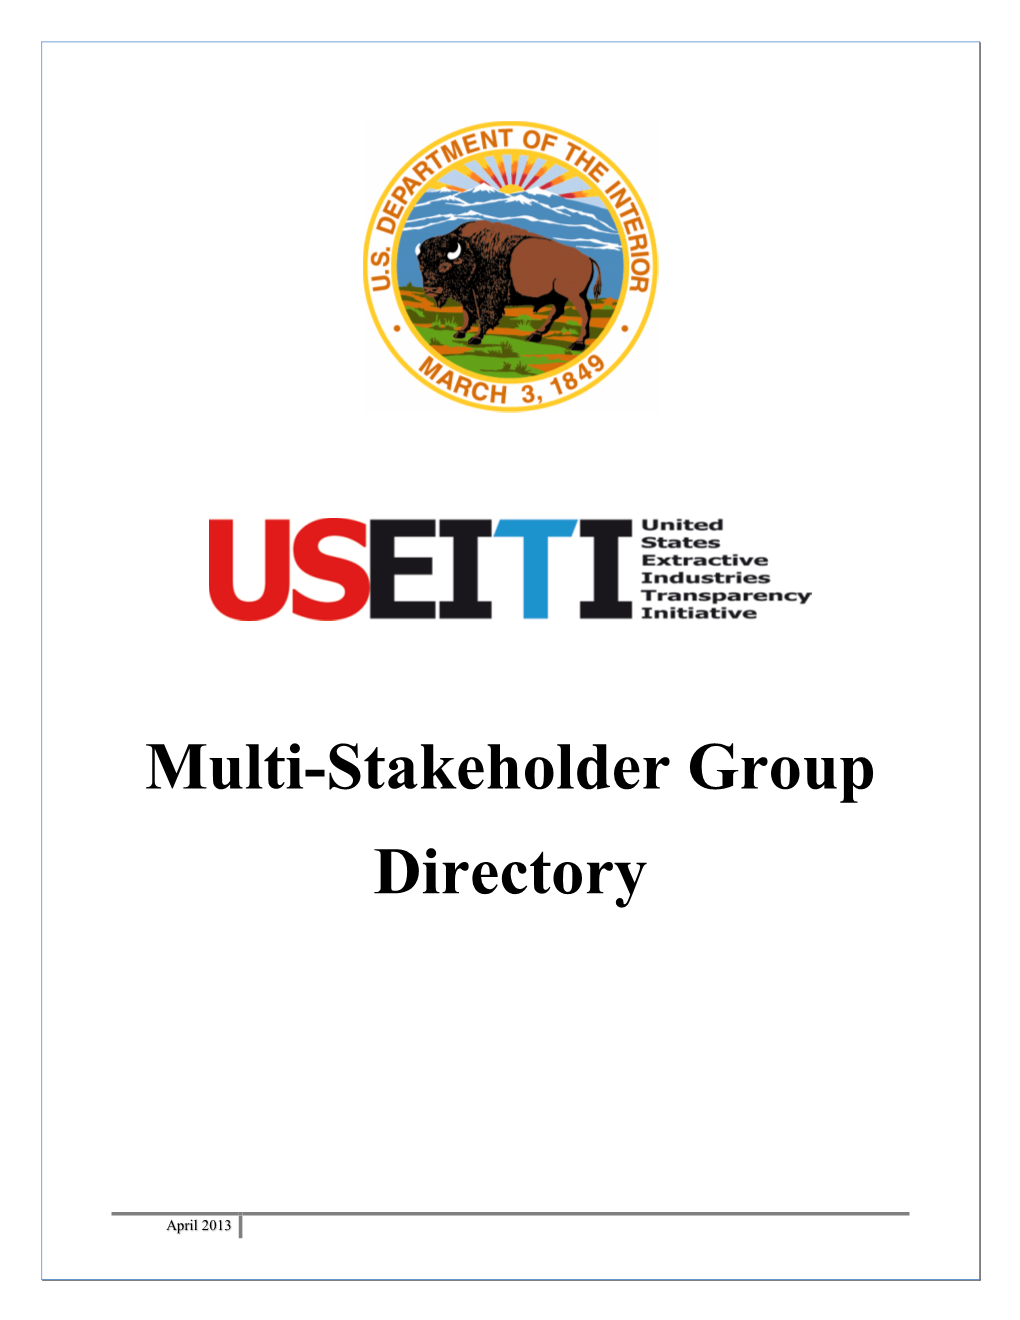 Multi-Stakeholder Group Directory